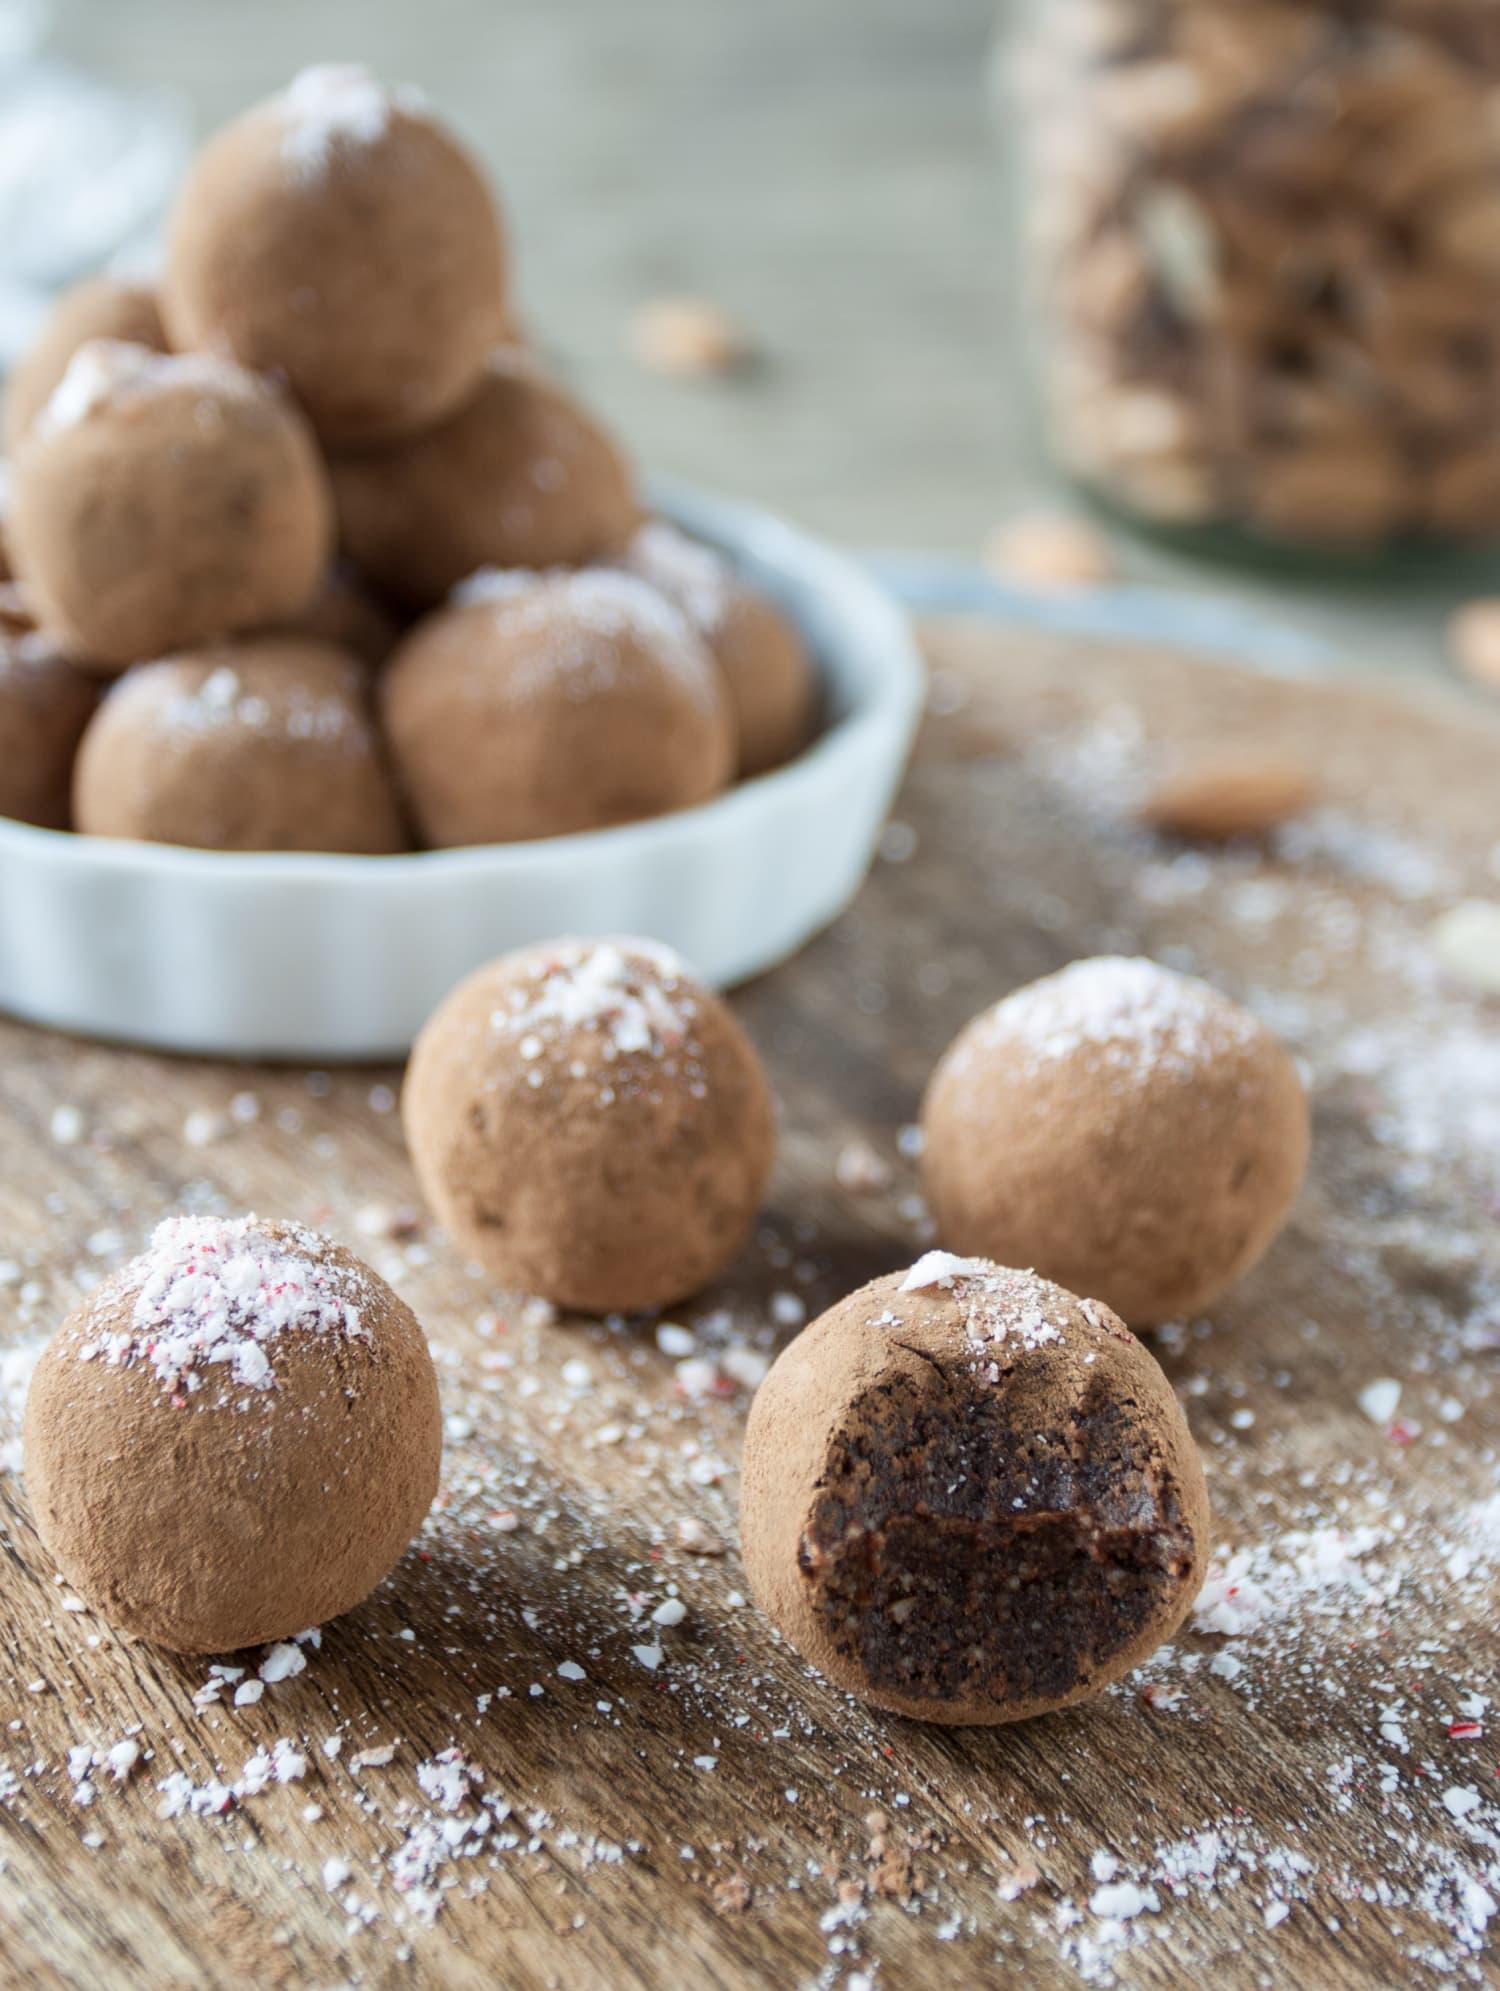 These Quick and Easy Gingerbread Truffles Use Just 3 Ingredients and Are Ready in Less Than 30 Minutes